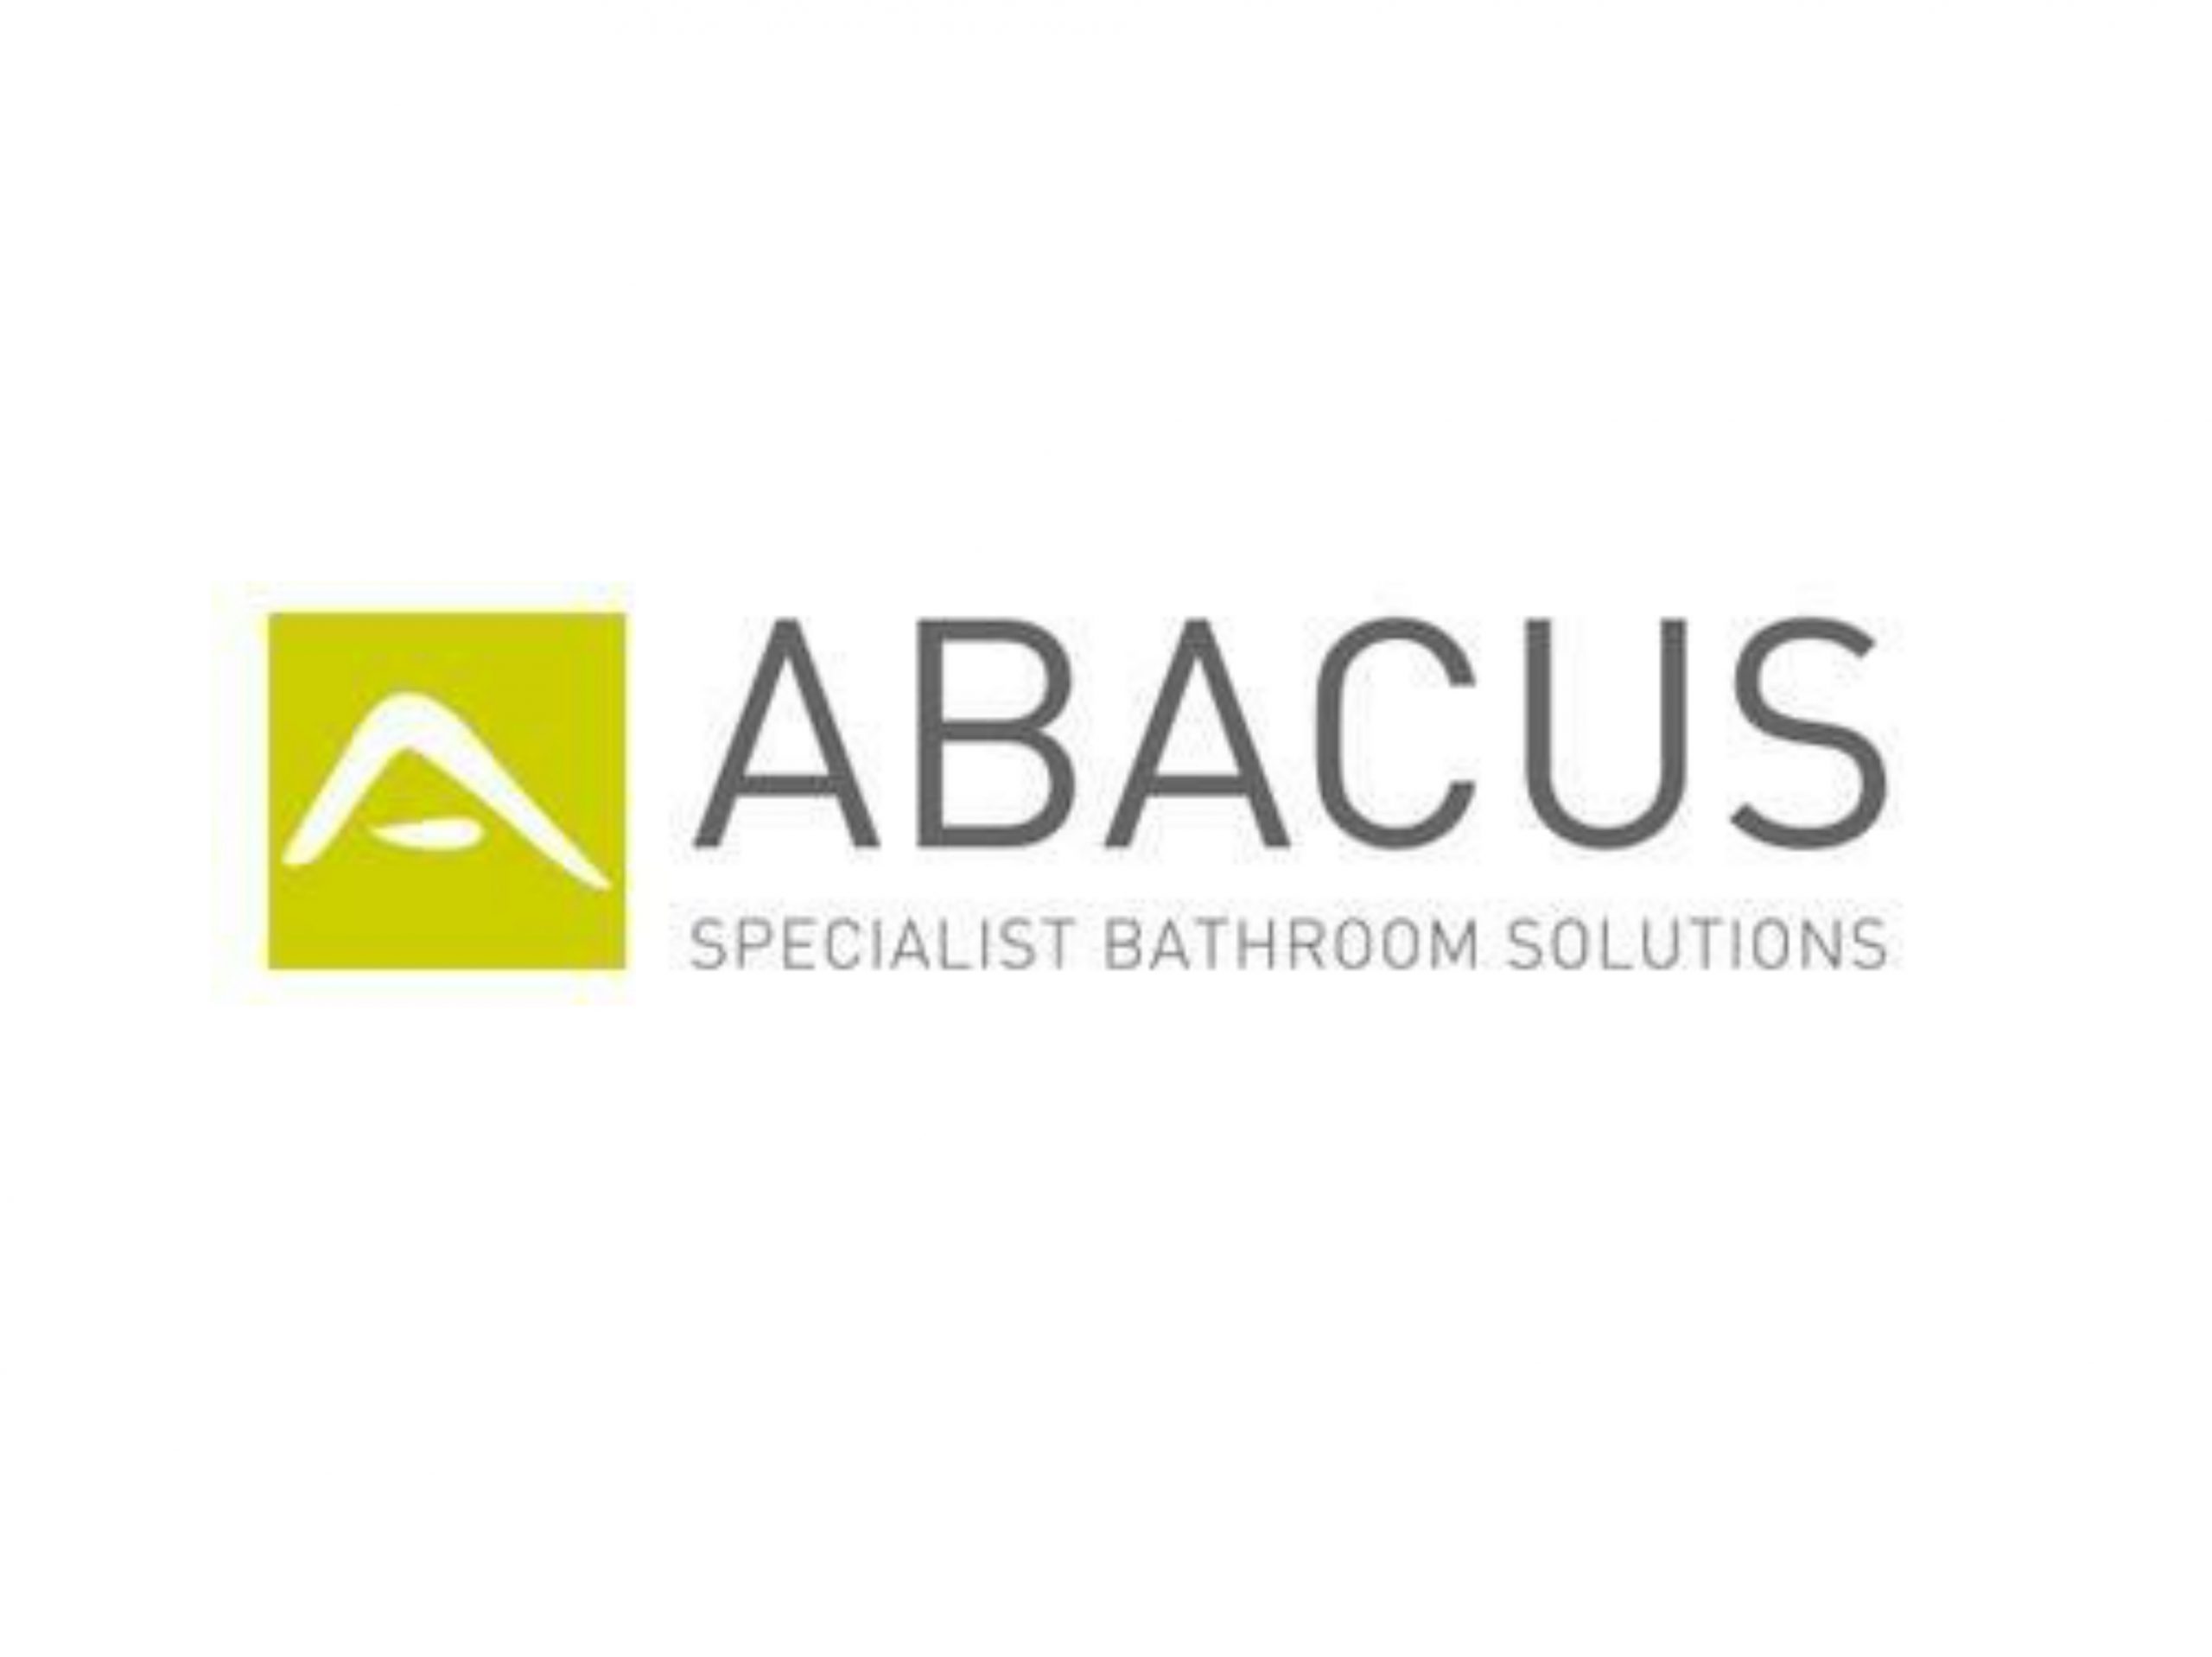 Abacus Regional Assessment Manager enhances bath assessment safety with a respected qualification